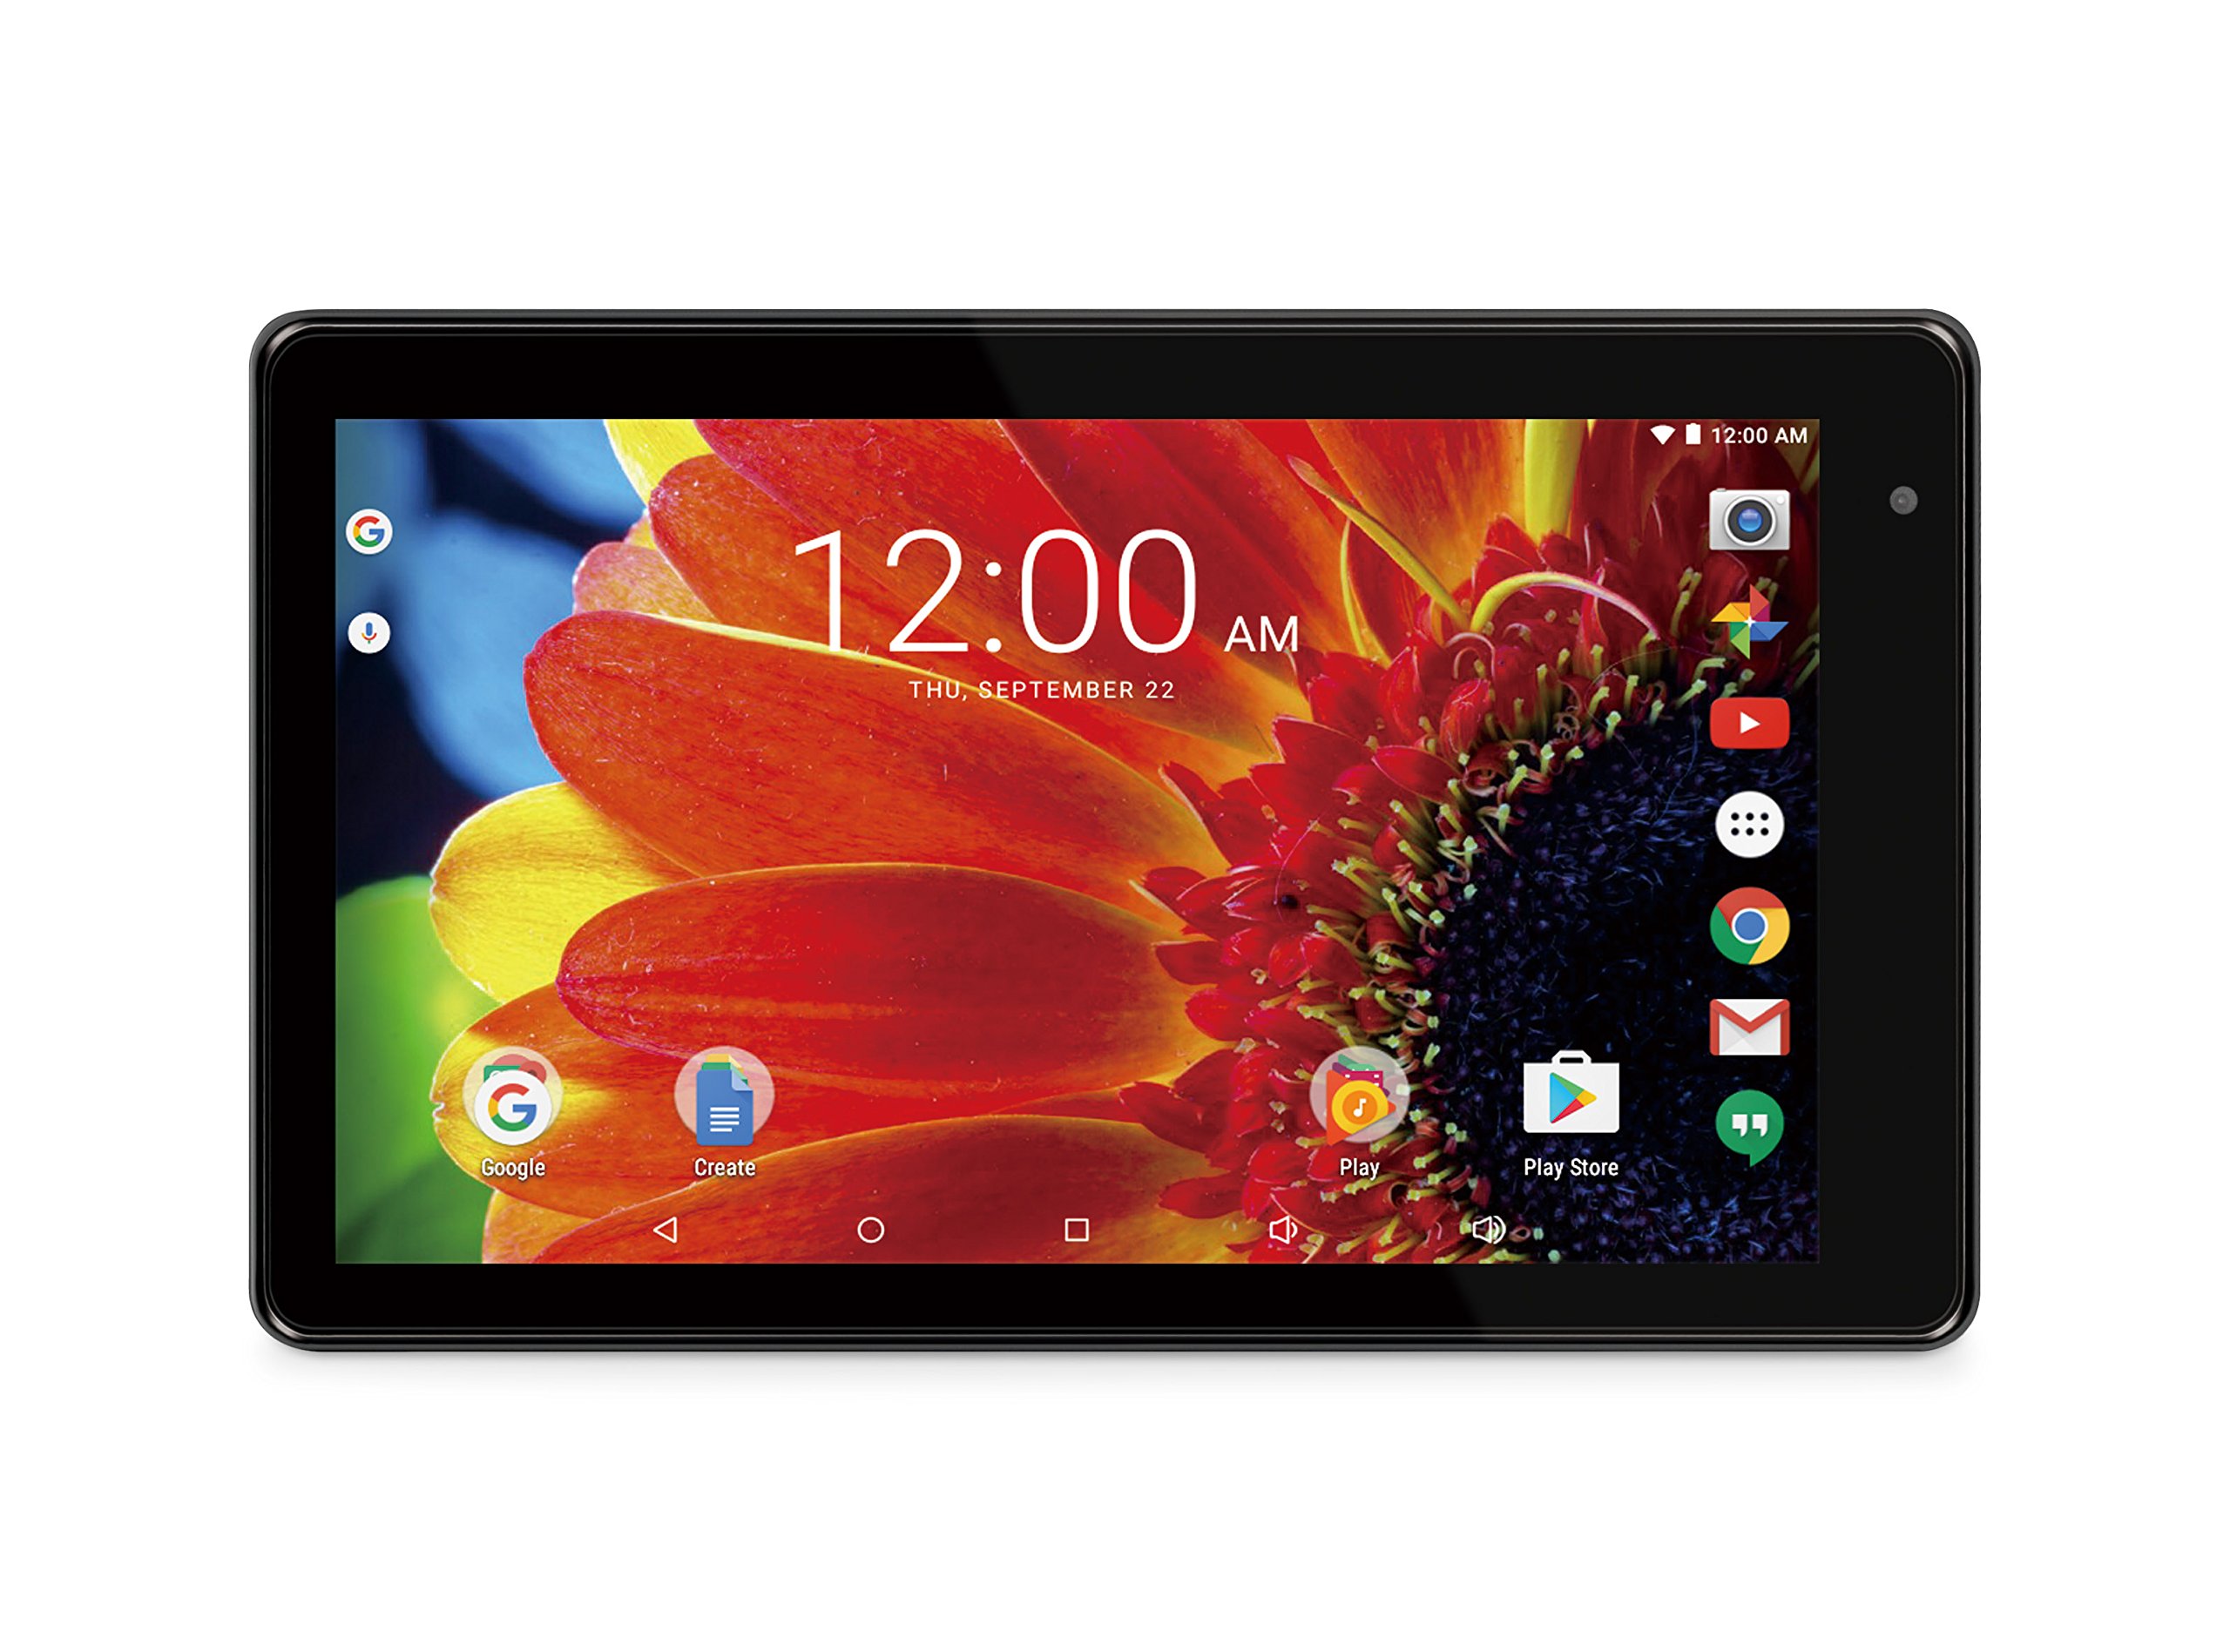 RCA RCT6873W42 Voyager 7 16GB Tablet 1024 X 600 Resolution 1.2GHz Intel Atom Quad-Core Processor Android 6.0 Marshmallow, Black